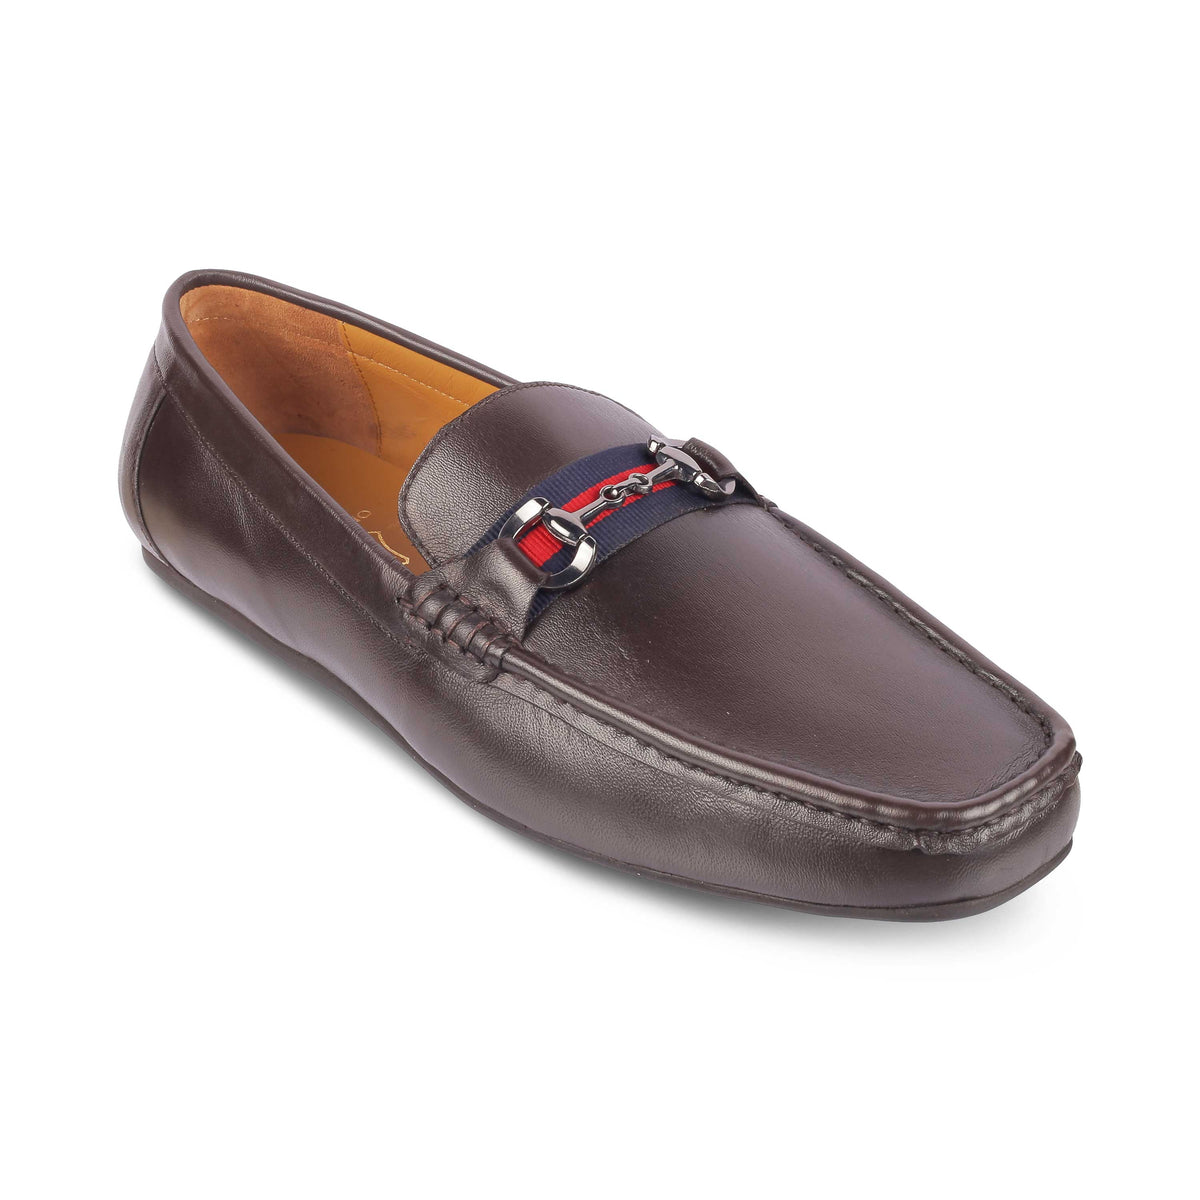 Tresmode Bilbao Brown Men's Leather Loafers - Tresmode